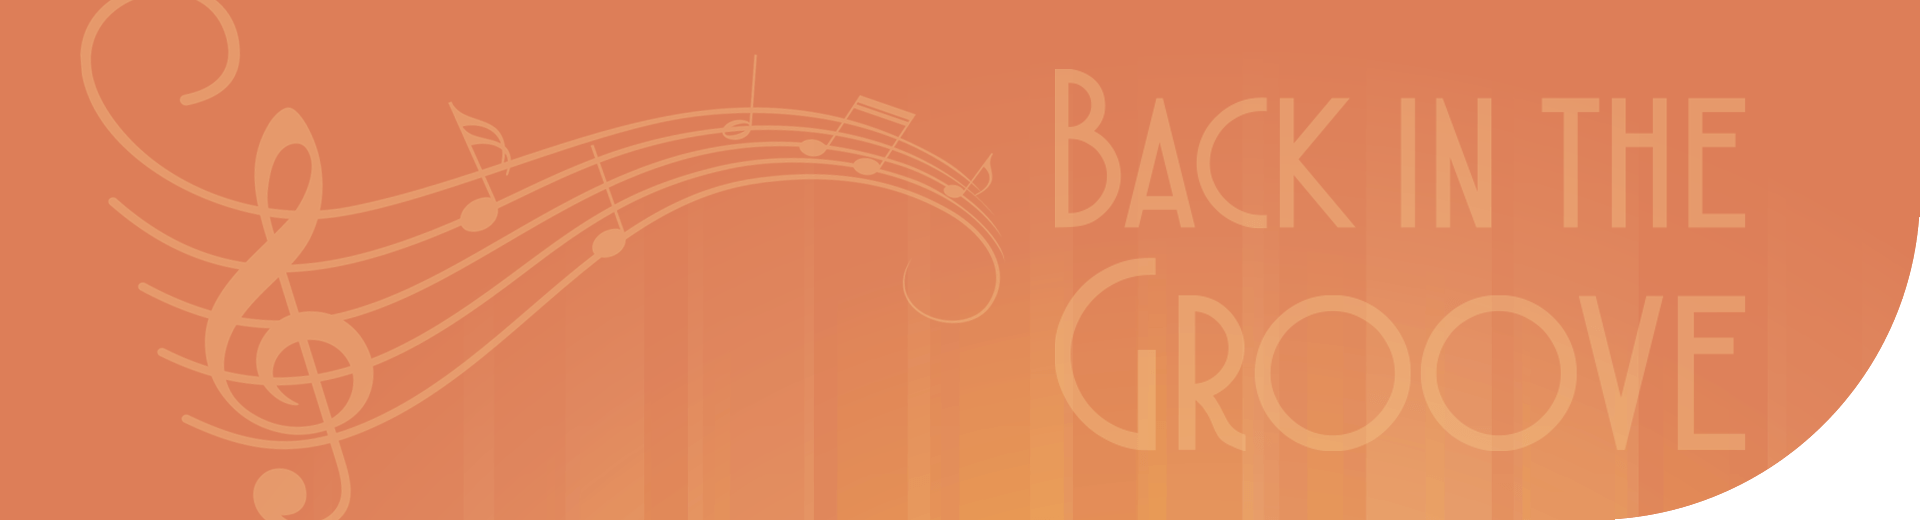 Back in the Groove Goodwill Gala Header